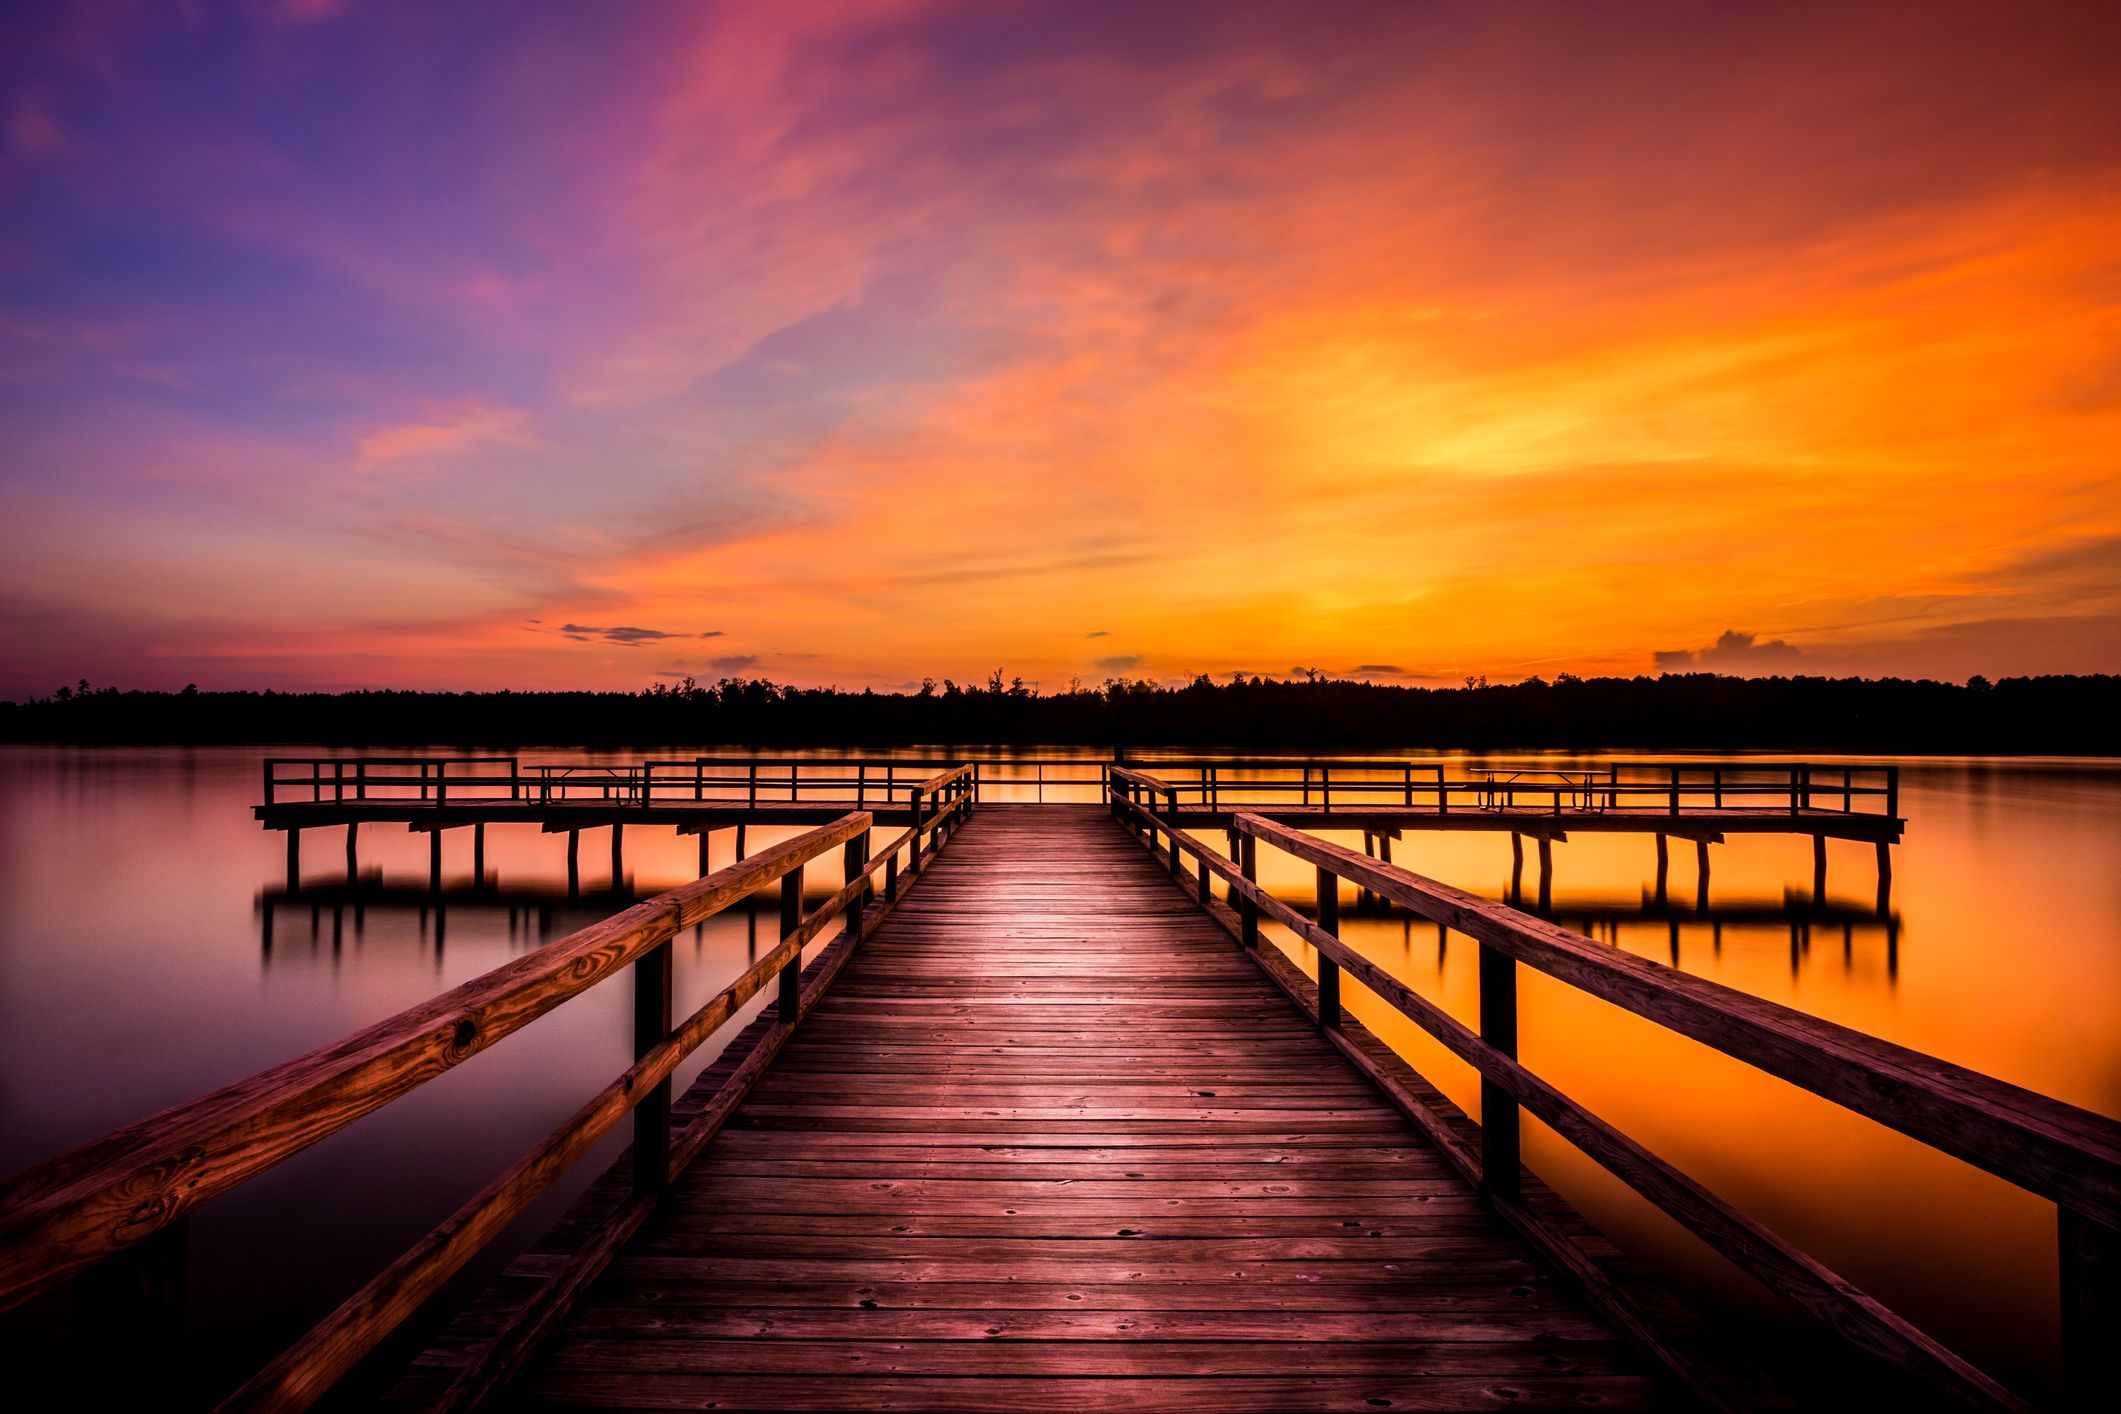 A dock overlooking a sunset over water; Getty Images